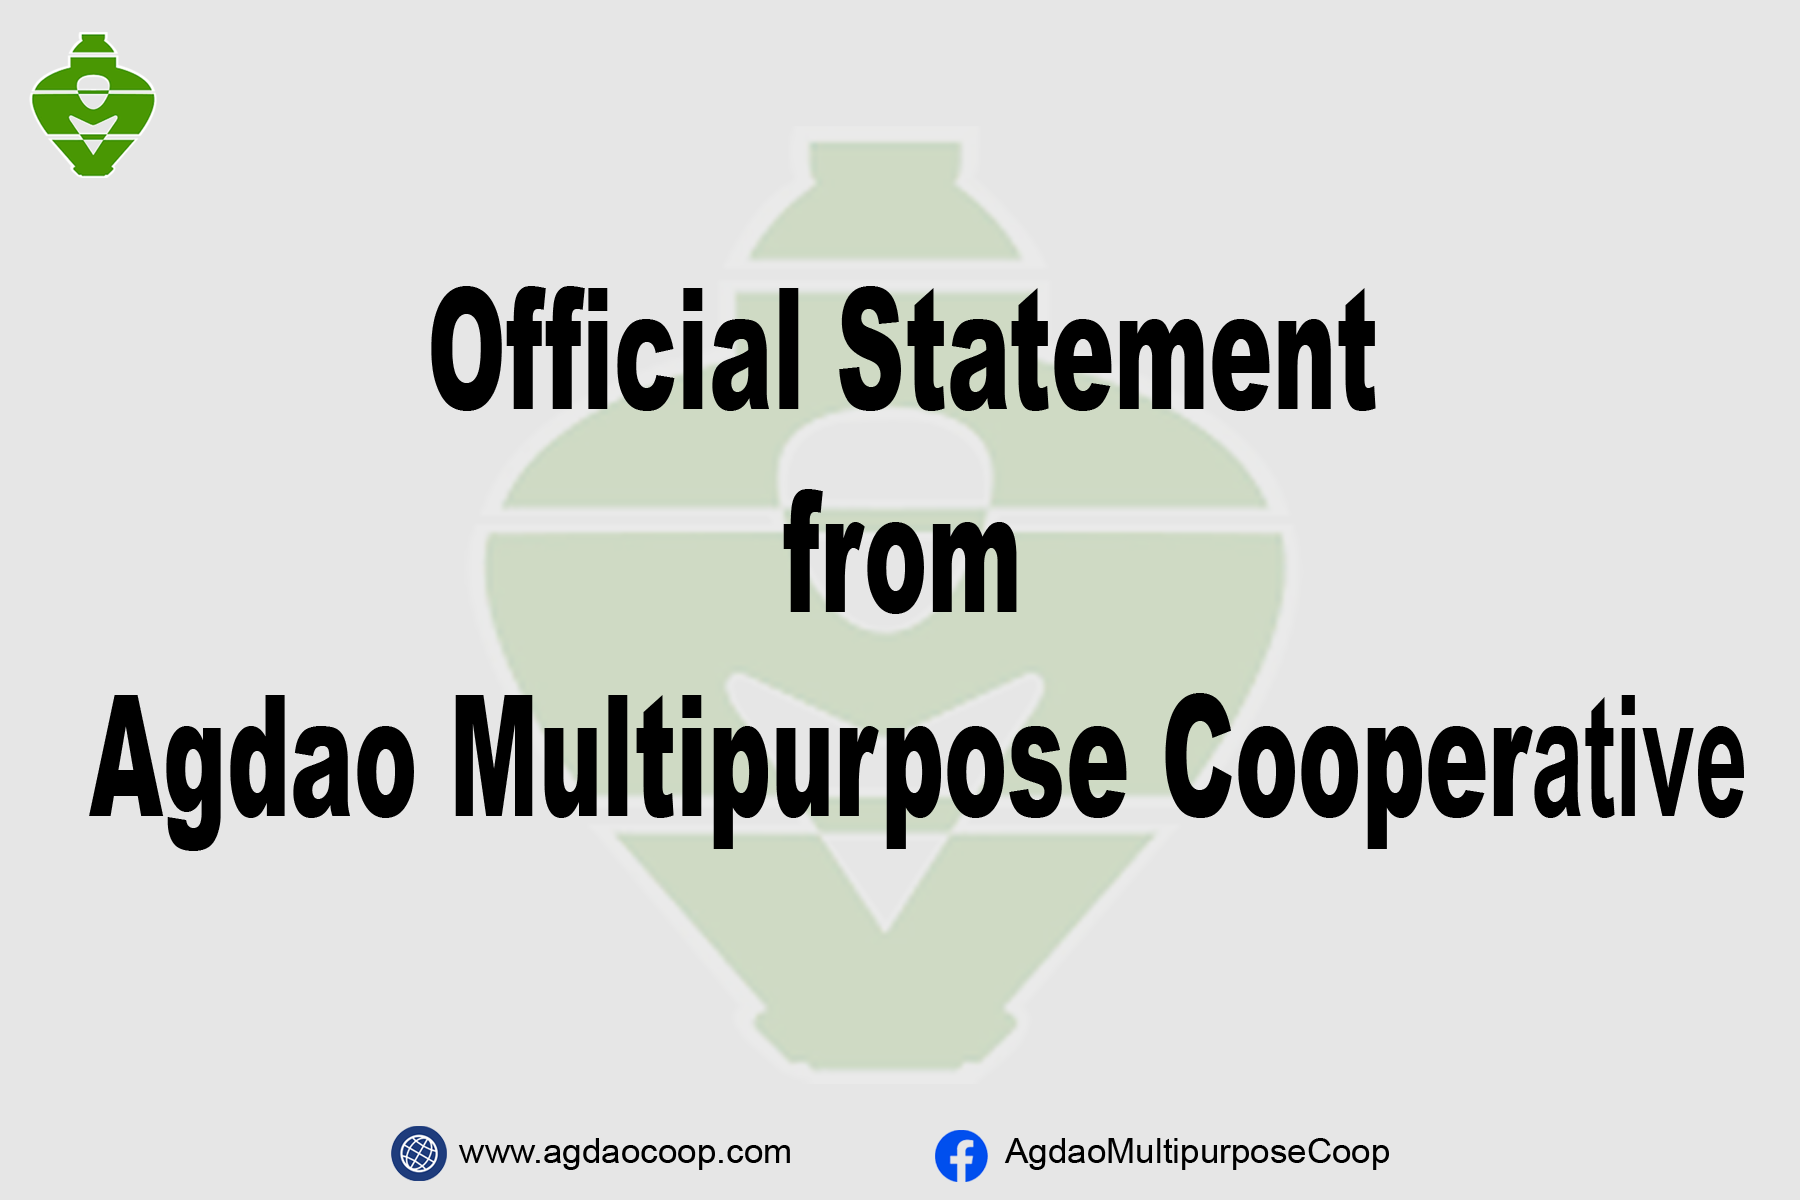 Official Statement from Agdao Multipurpose Cooperative.